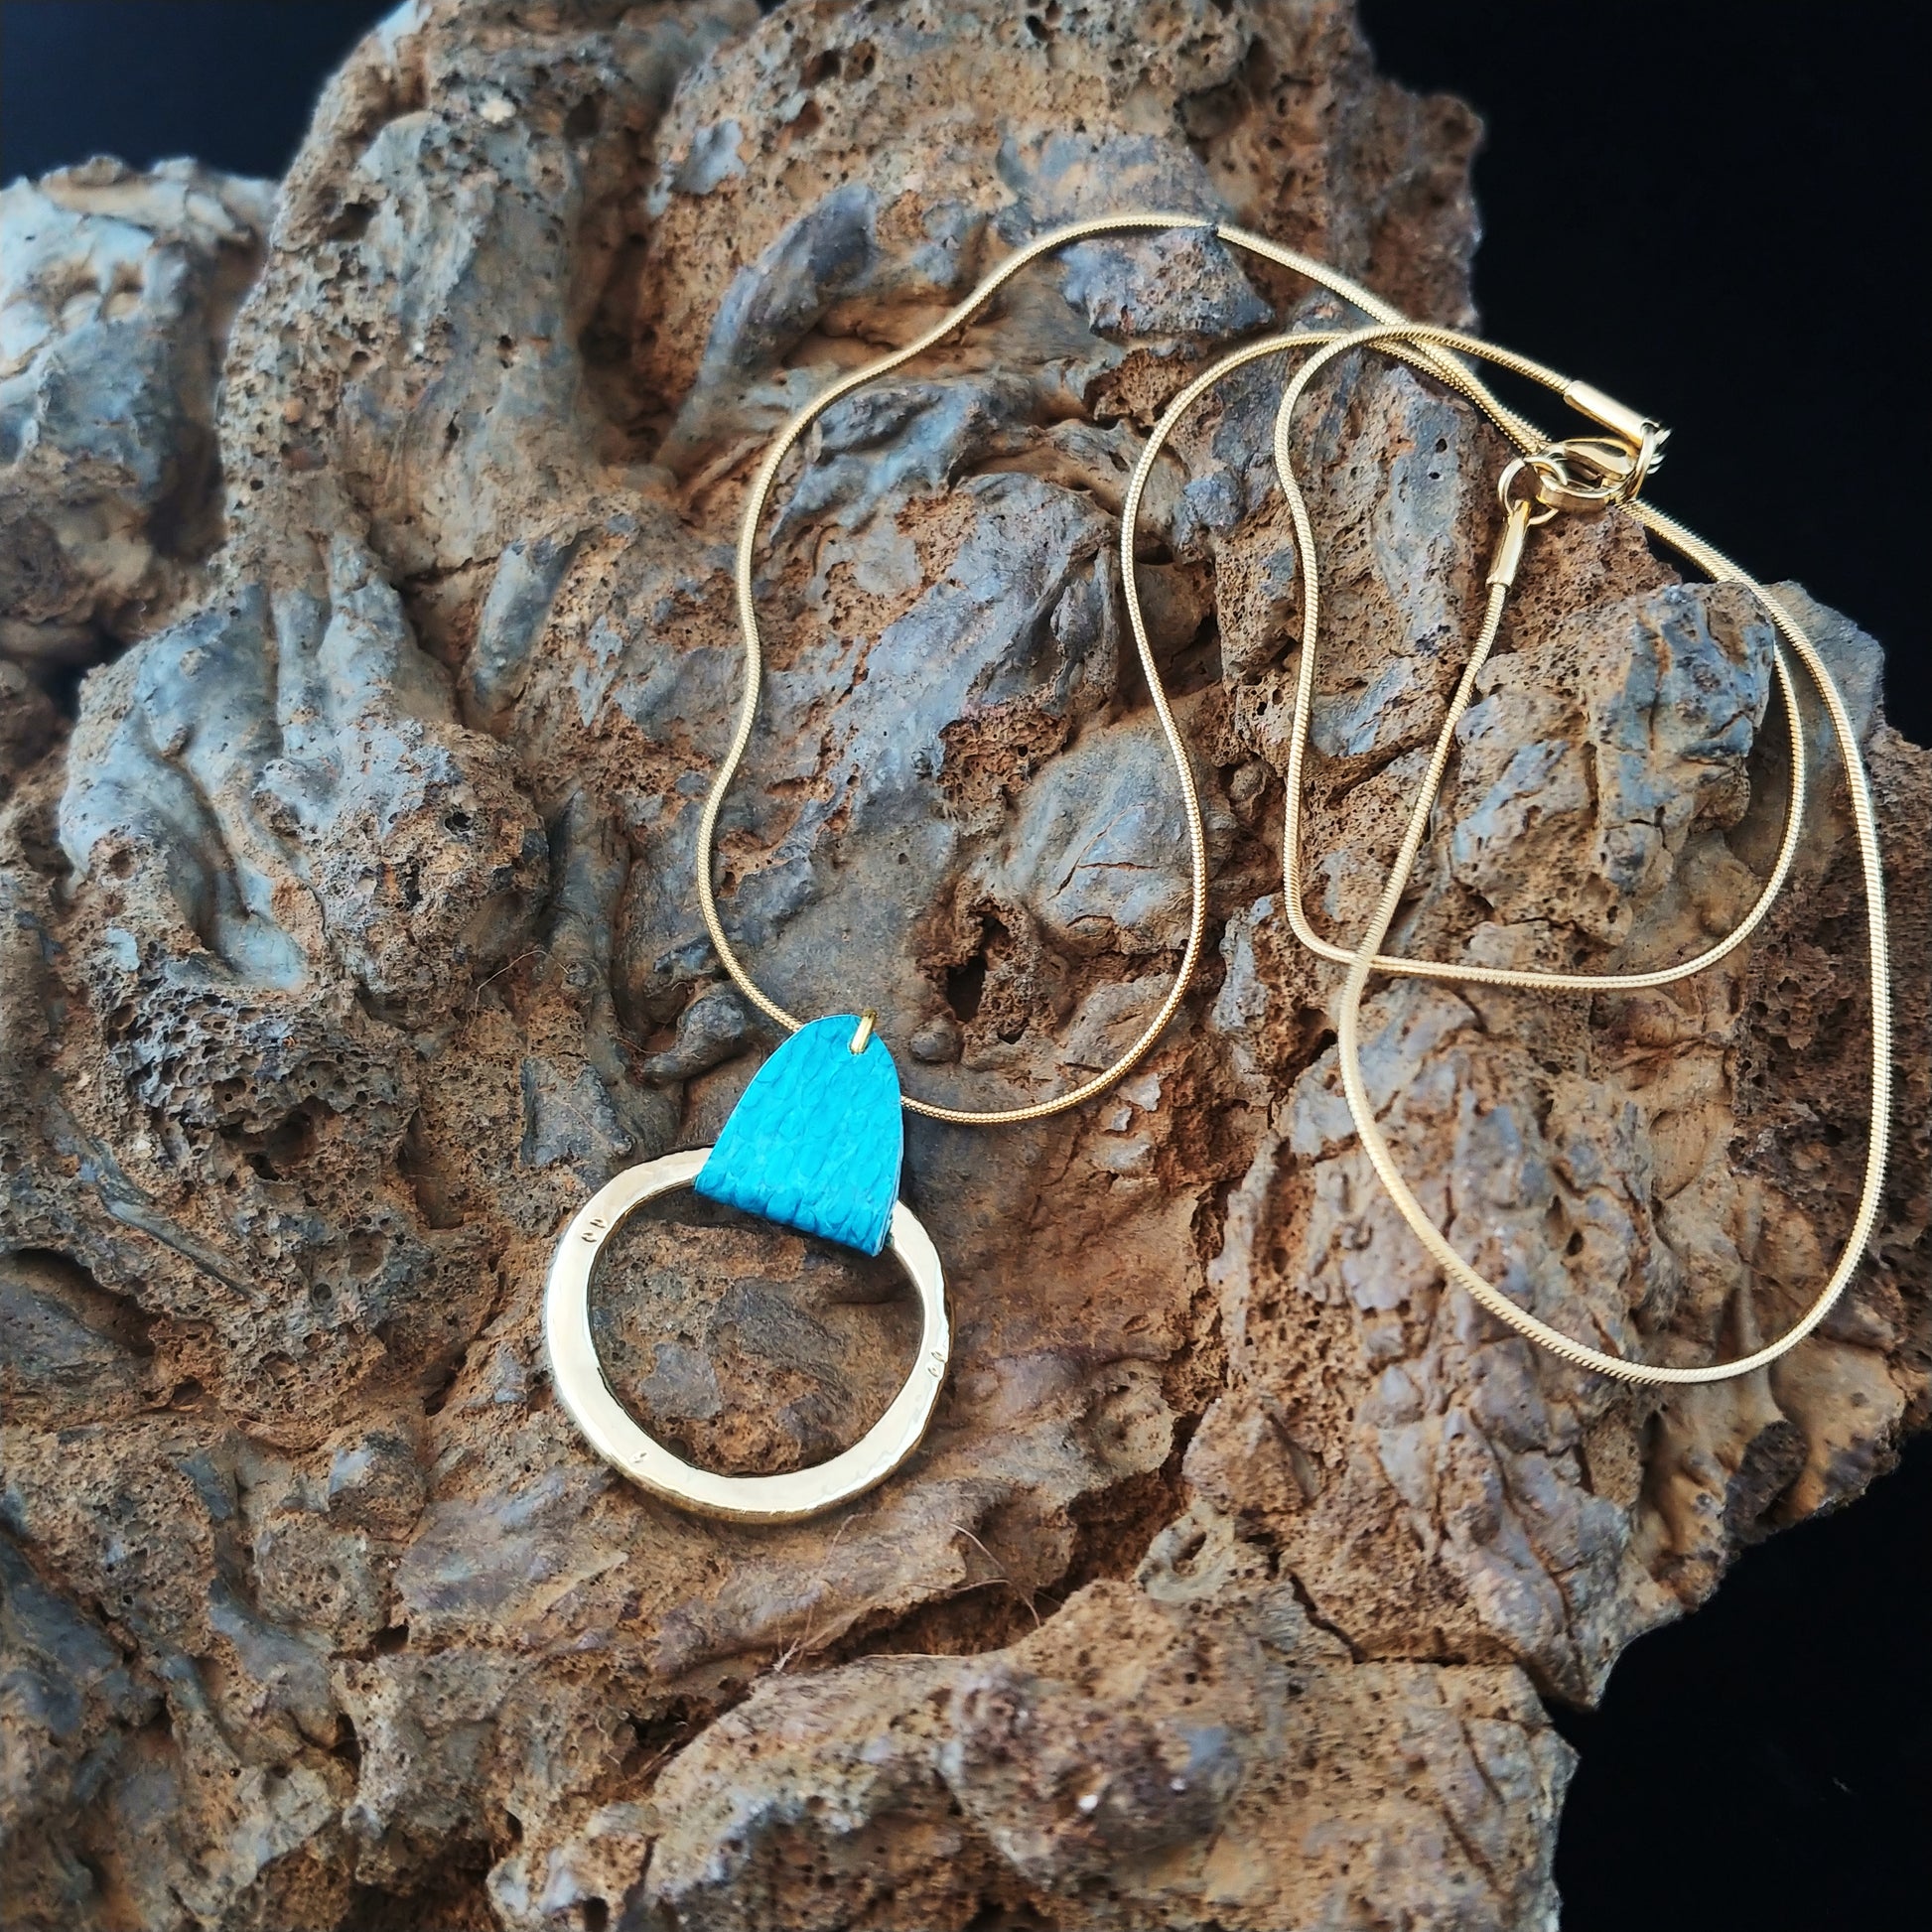 Necklace sitting on a black lava display. Necklace chain and circle center piece are golden color and the chain and circle are connected with icelandic fish leather that's brigh blue.